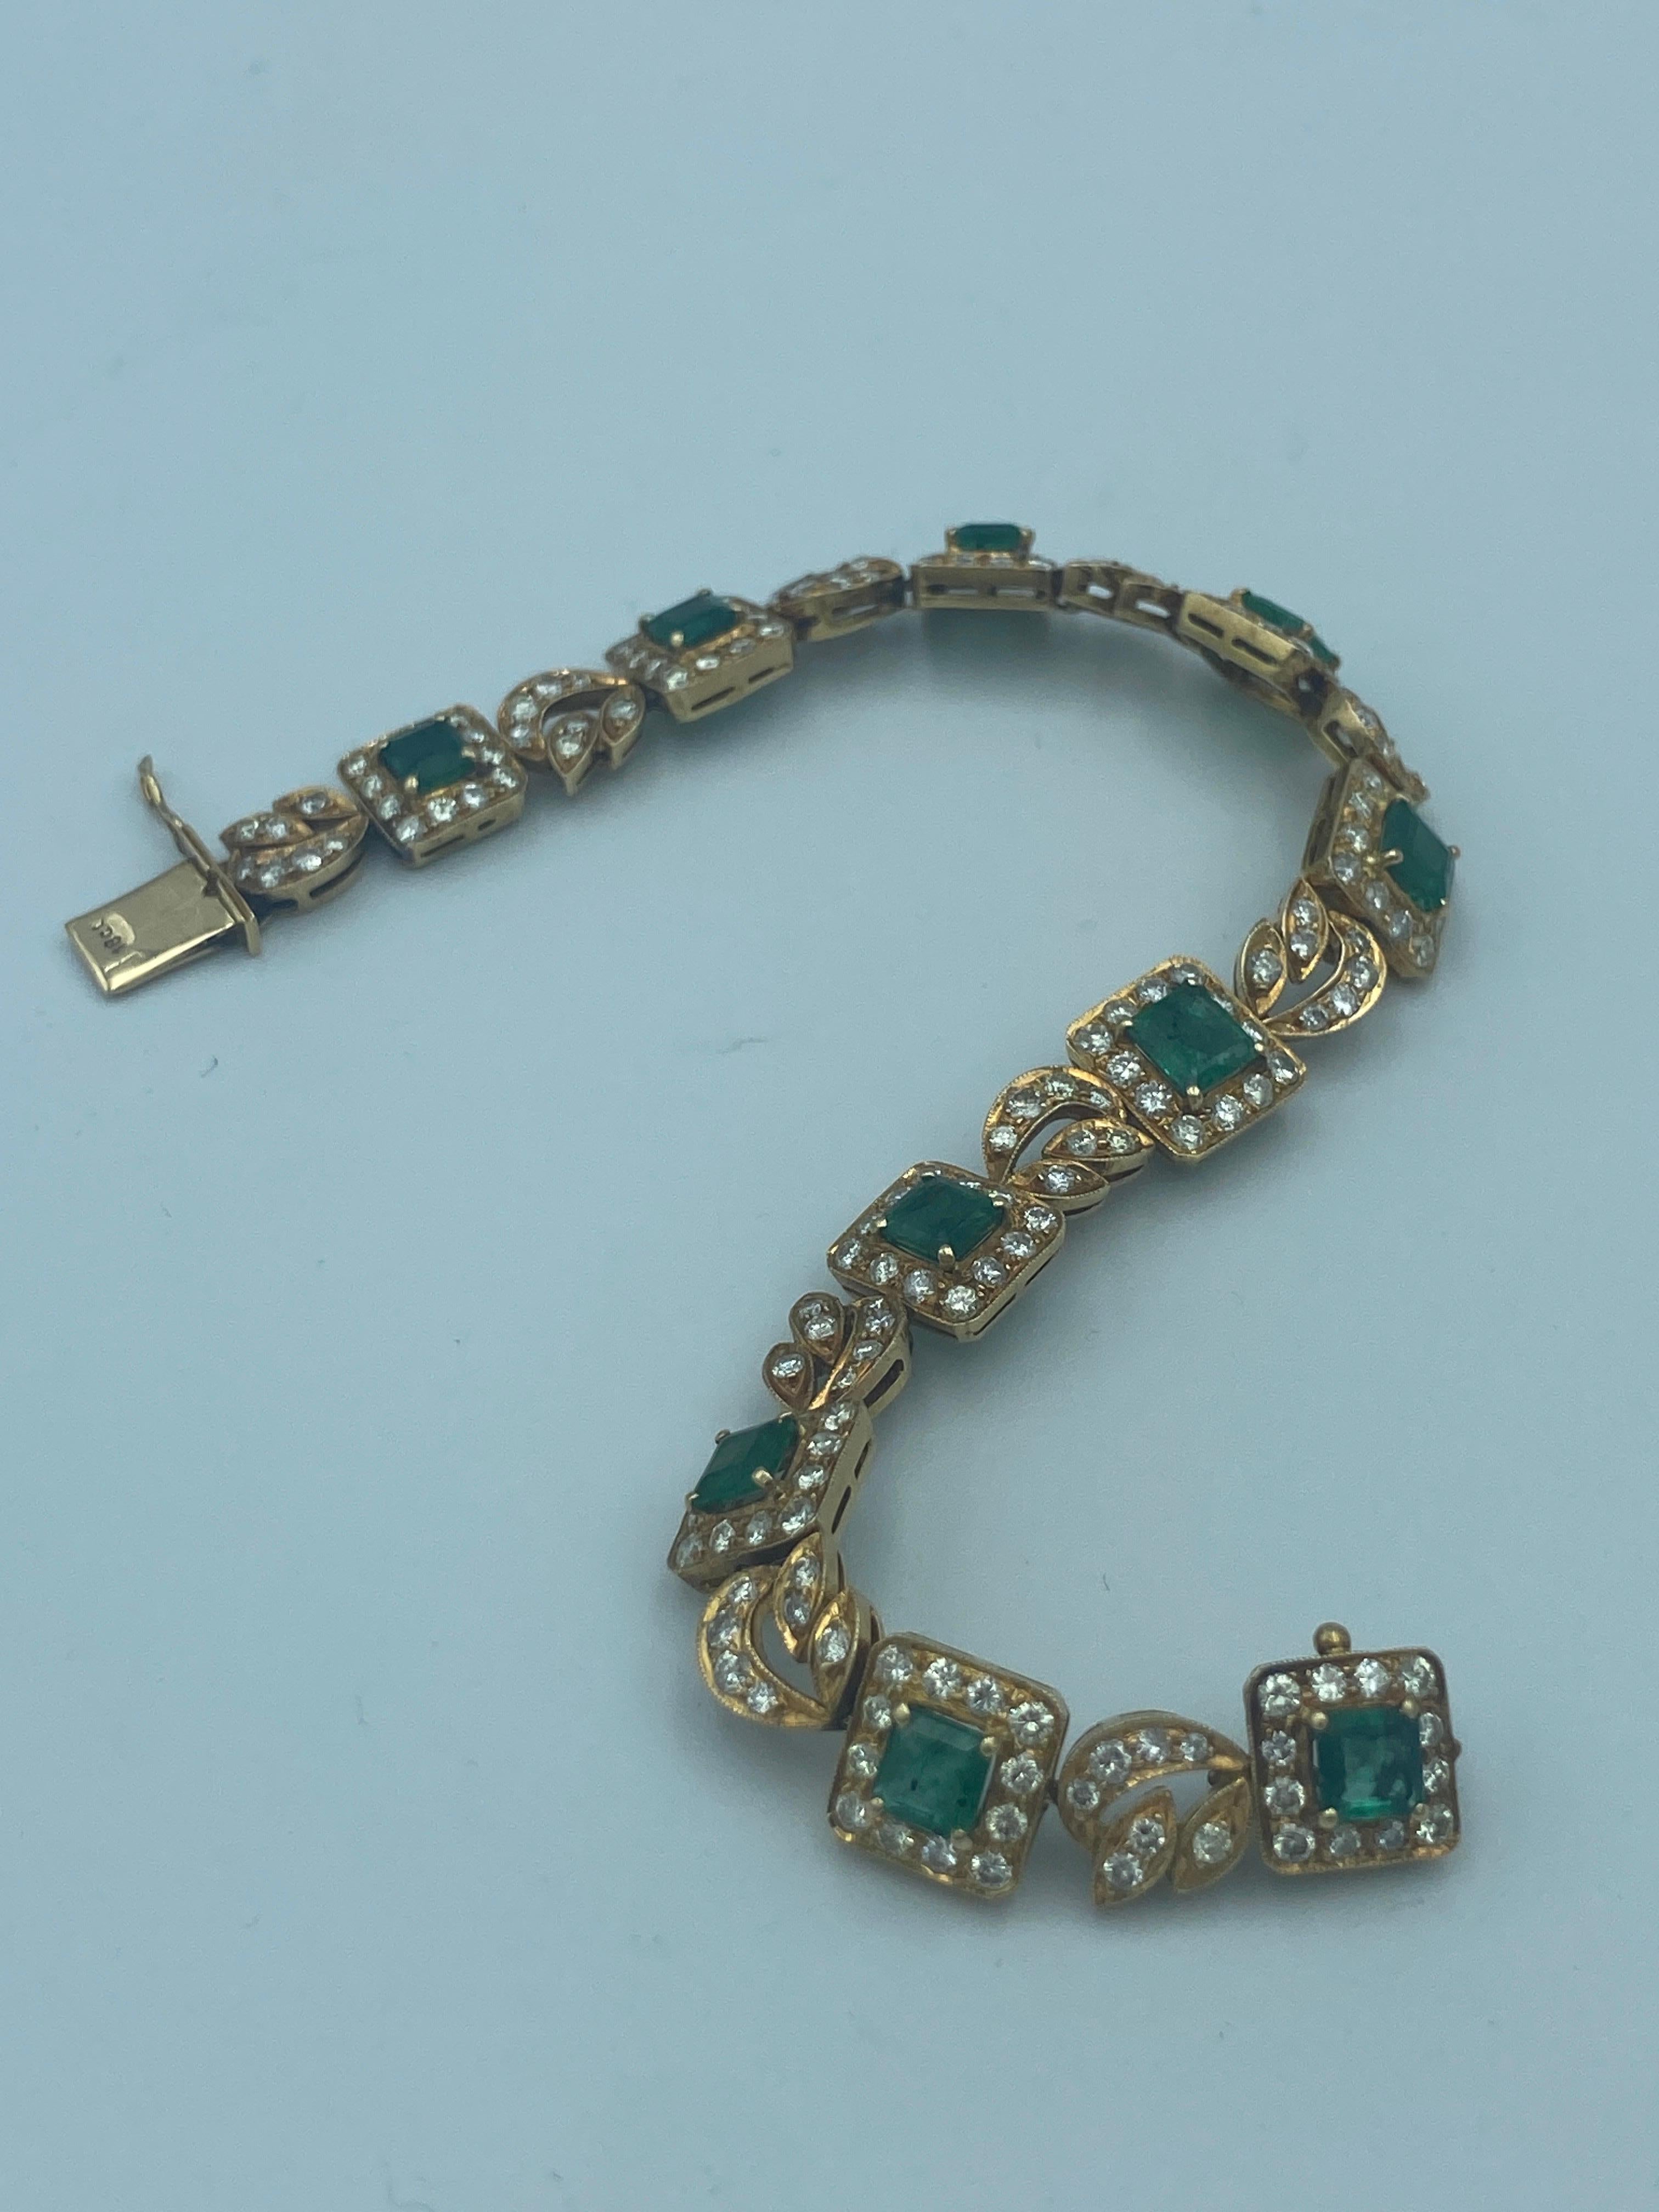 This elegant 1960s European made 18 carat gold, diamond and Colombian emerald bracelet is a delightful piece. It consists of approximately 6.5 carats of diamonds and approximately 6 carats of Asscher cut emeralds. It is quite a long bracelet and can